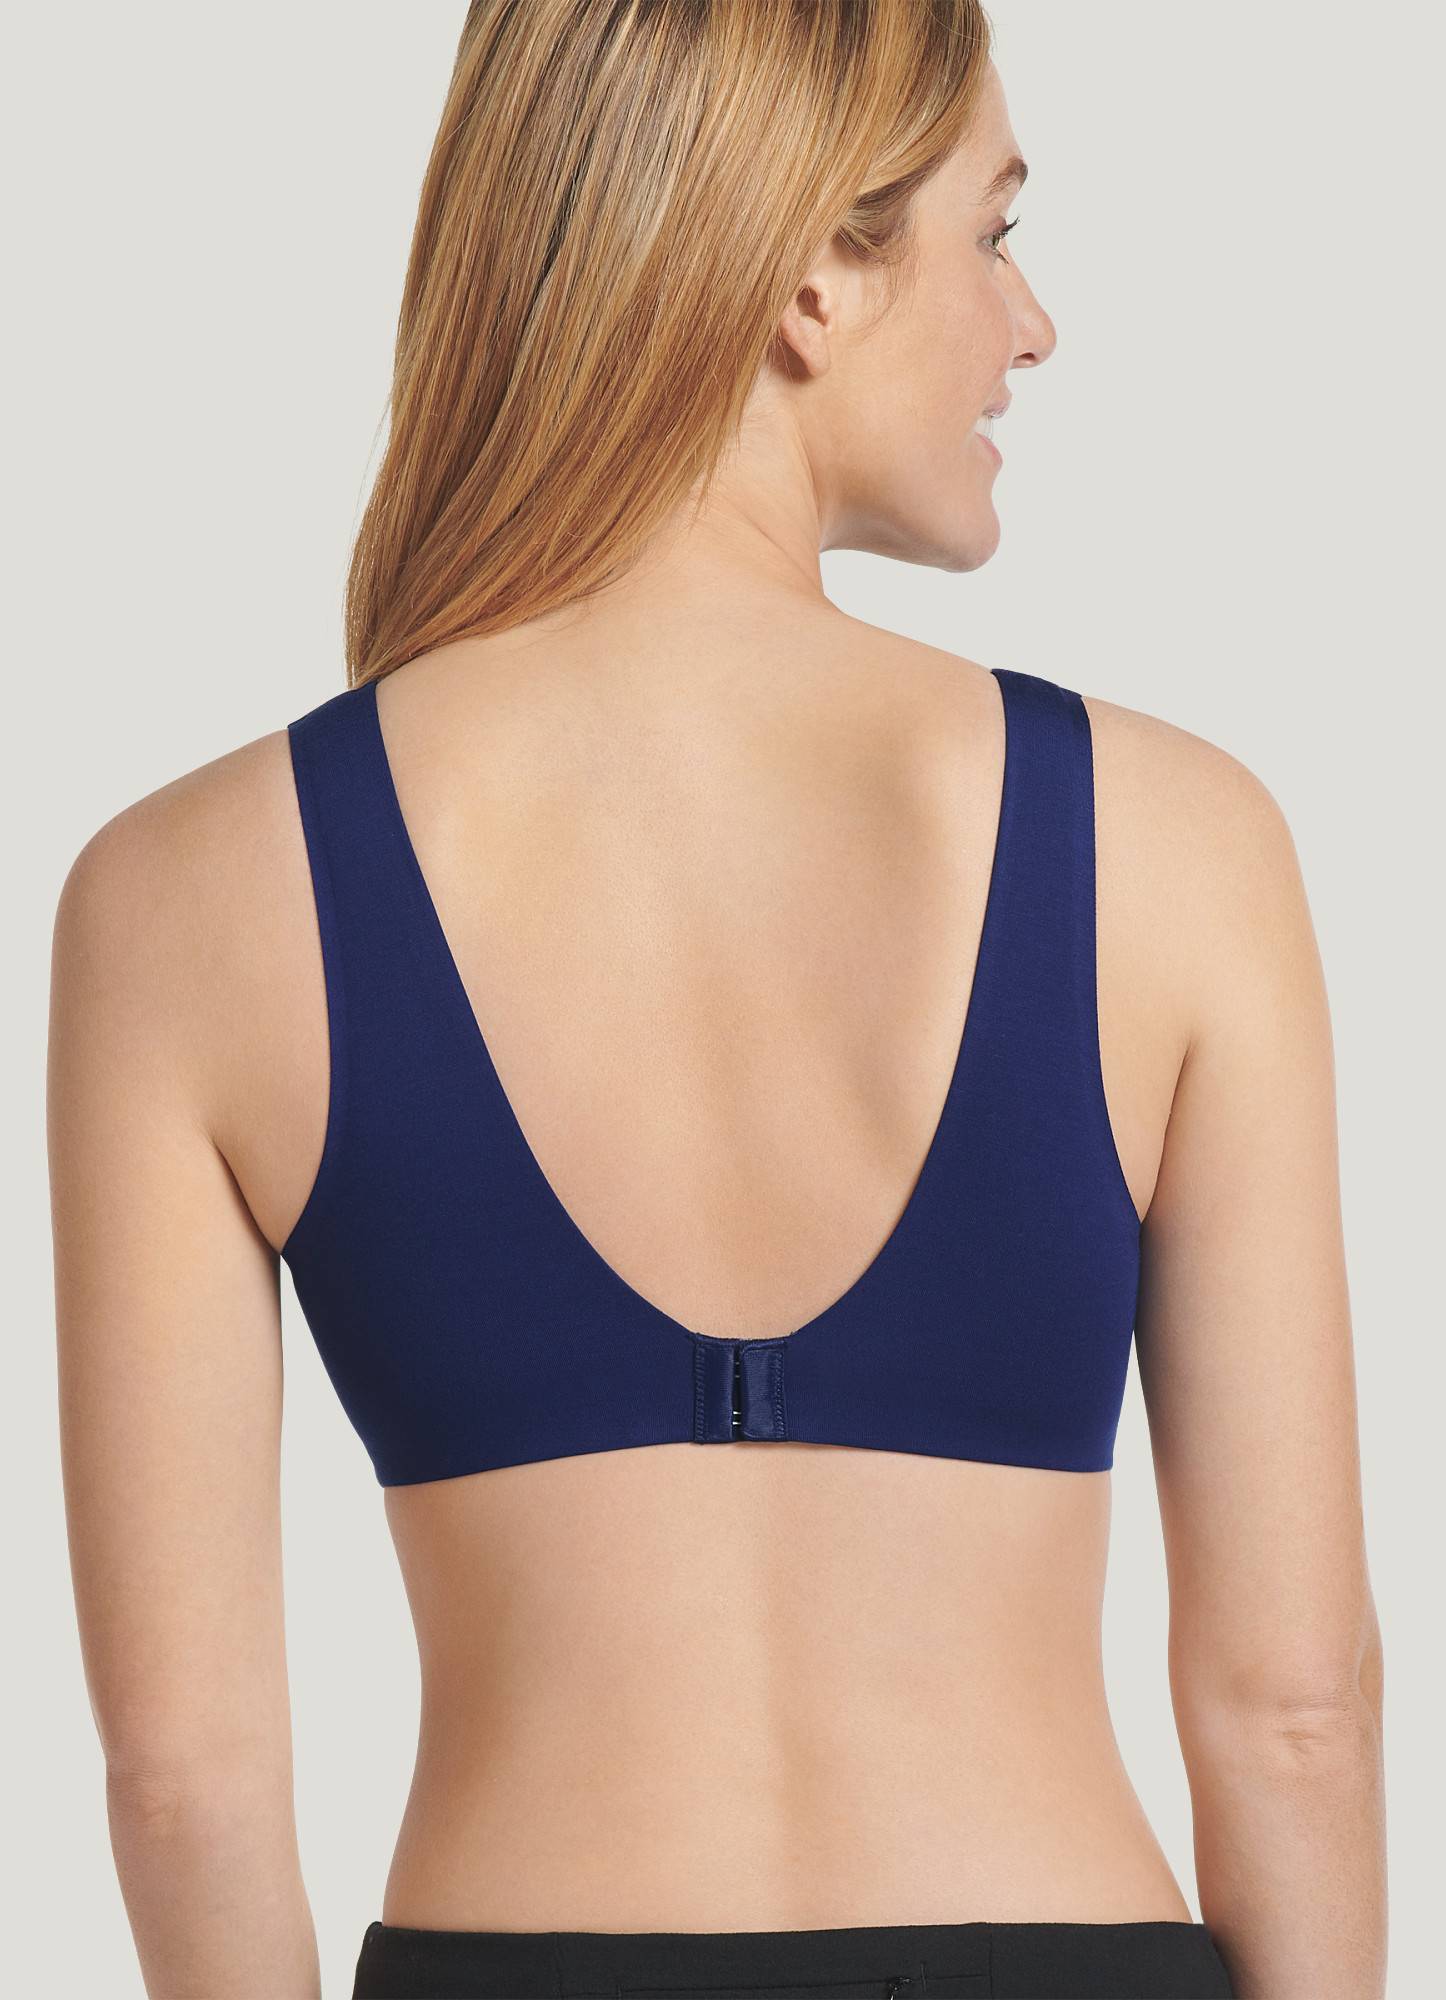 Buy Soft Touch Bralette, Fast Delivery